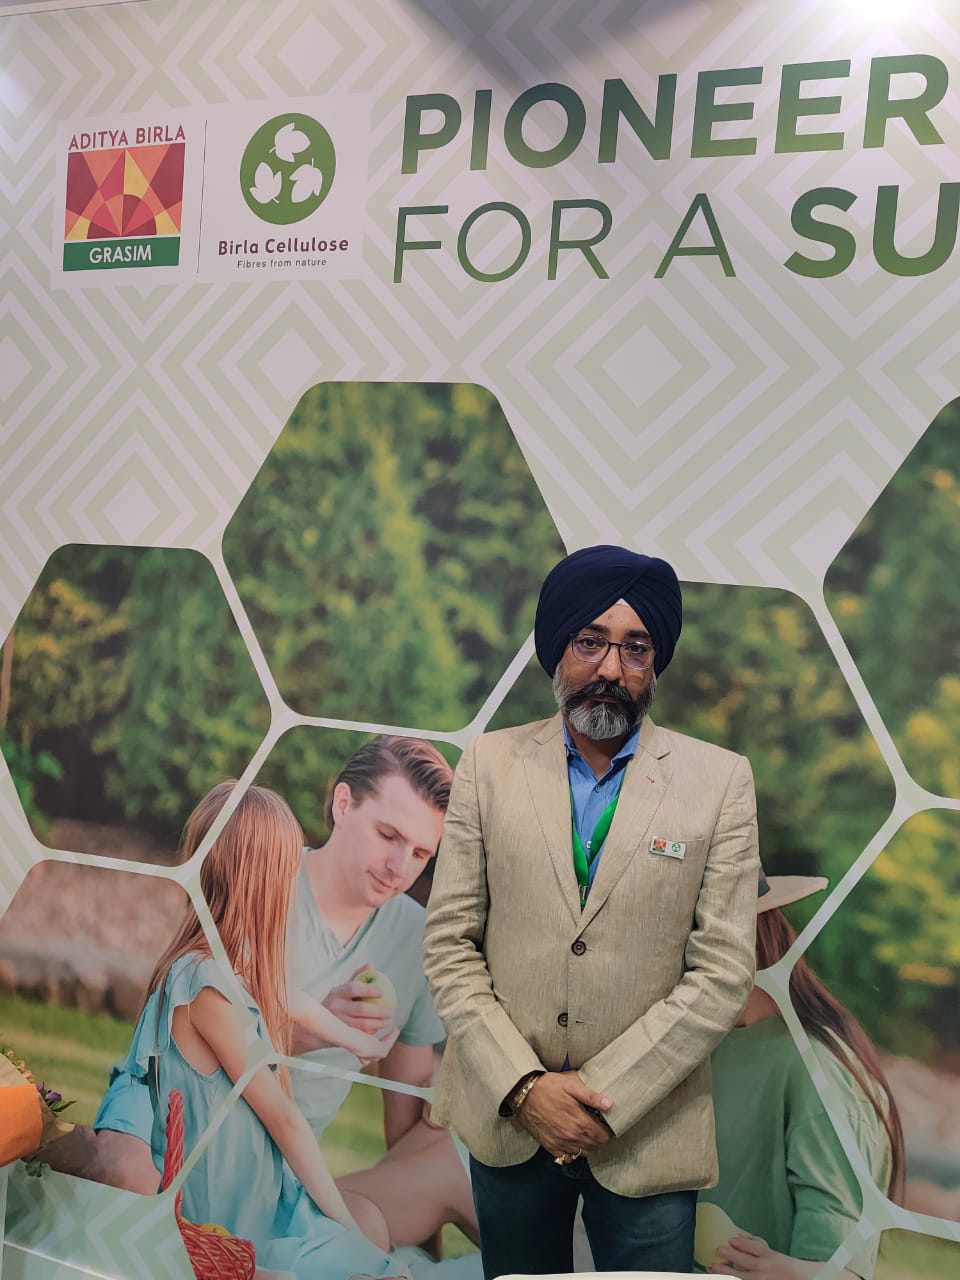 Birla Cellulose is focusing on sustainable fibres for textiles